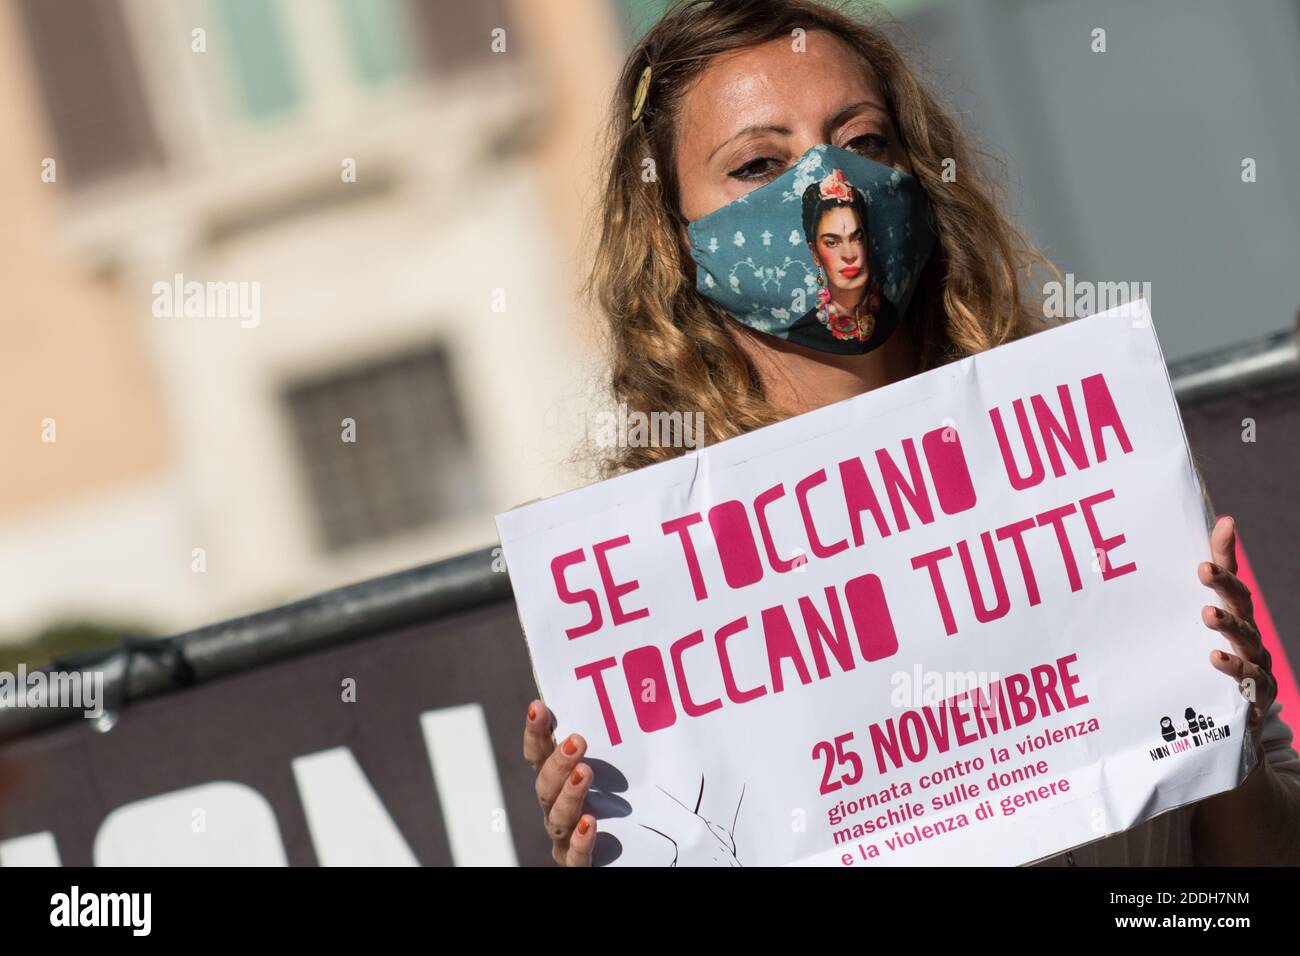 A protester holding a placard reading 'Se toccano una toccano tutte' (If  they touch one, they touch all) during a flash-mob organized by the "Non  una di meno" feminist movement, as part